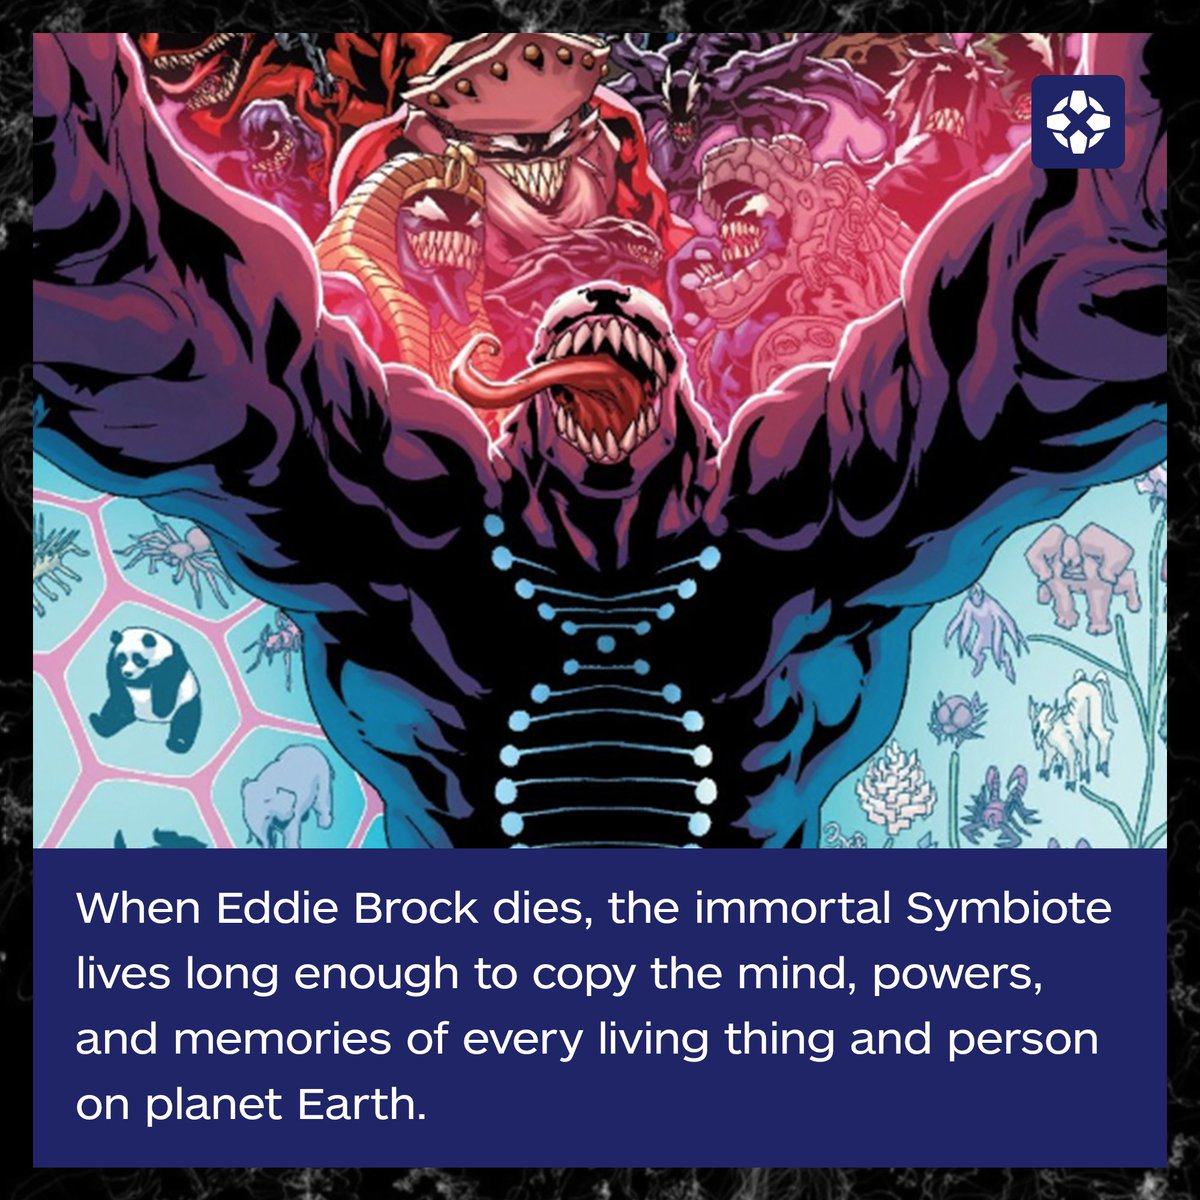 Venom may be the most powerful being in the universe, according to this new Marvel comic.  https://bit.ly/2yLOxiy 